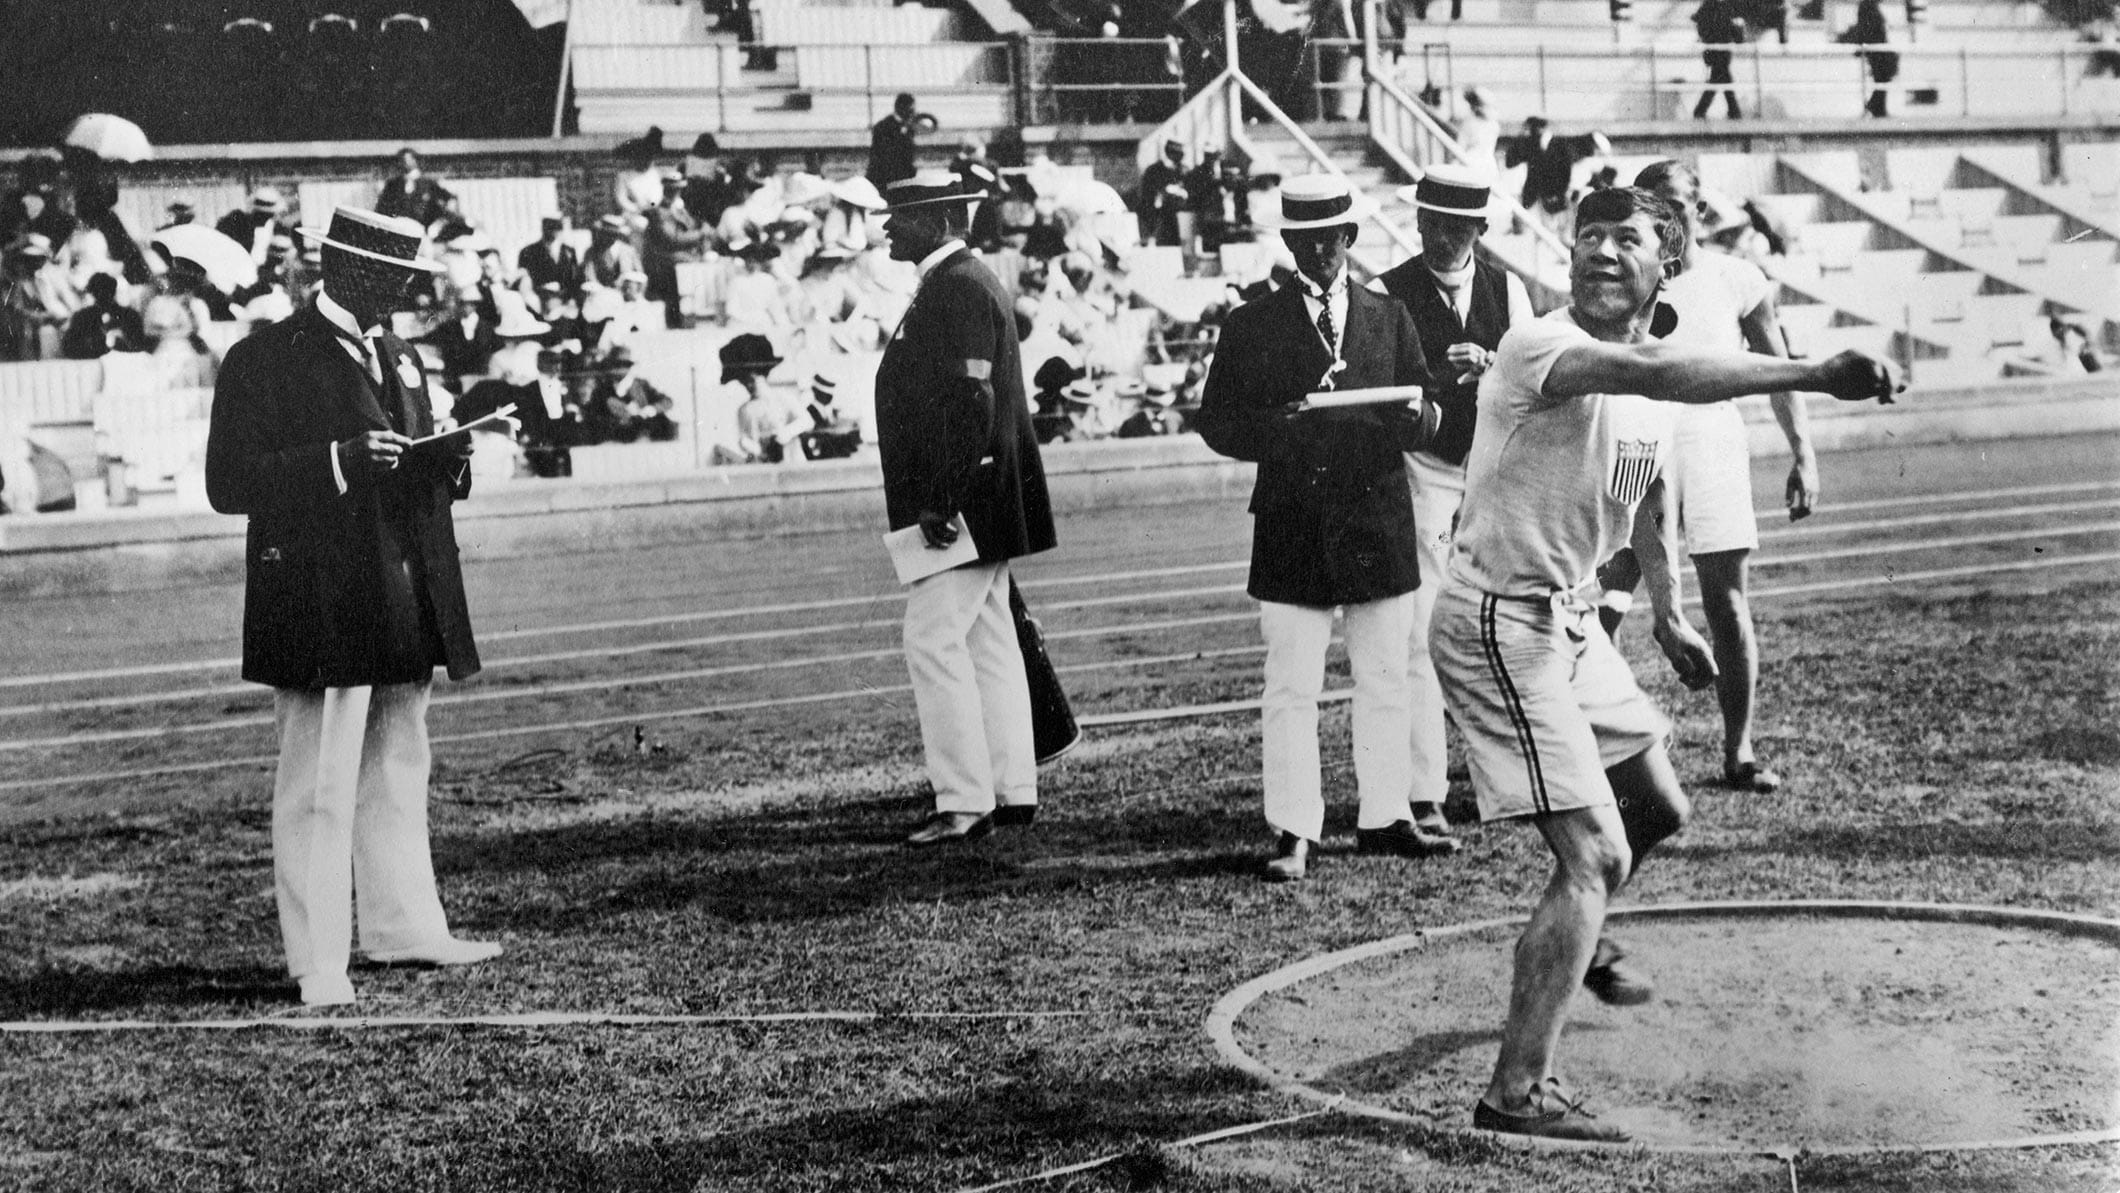 IOC to show the title of Jim Thorpe as sole Stockholm 1912 pentathlon and decathlon gold medallist